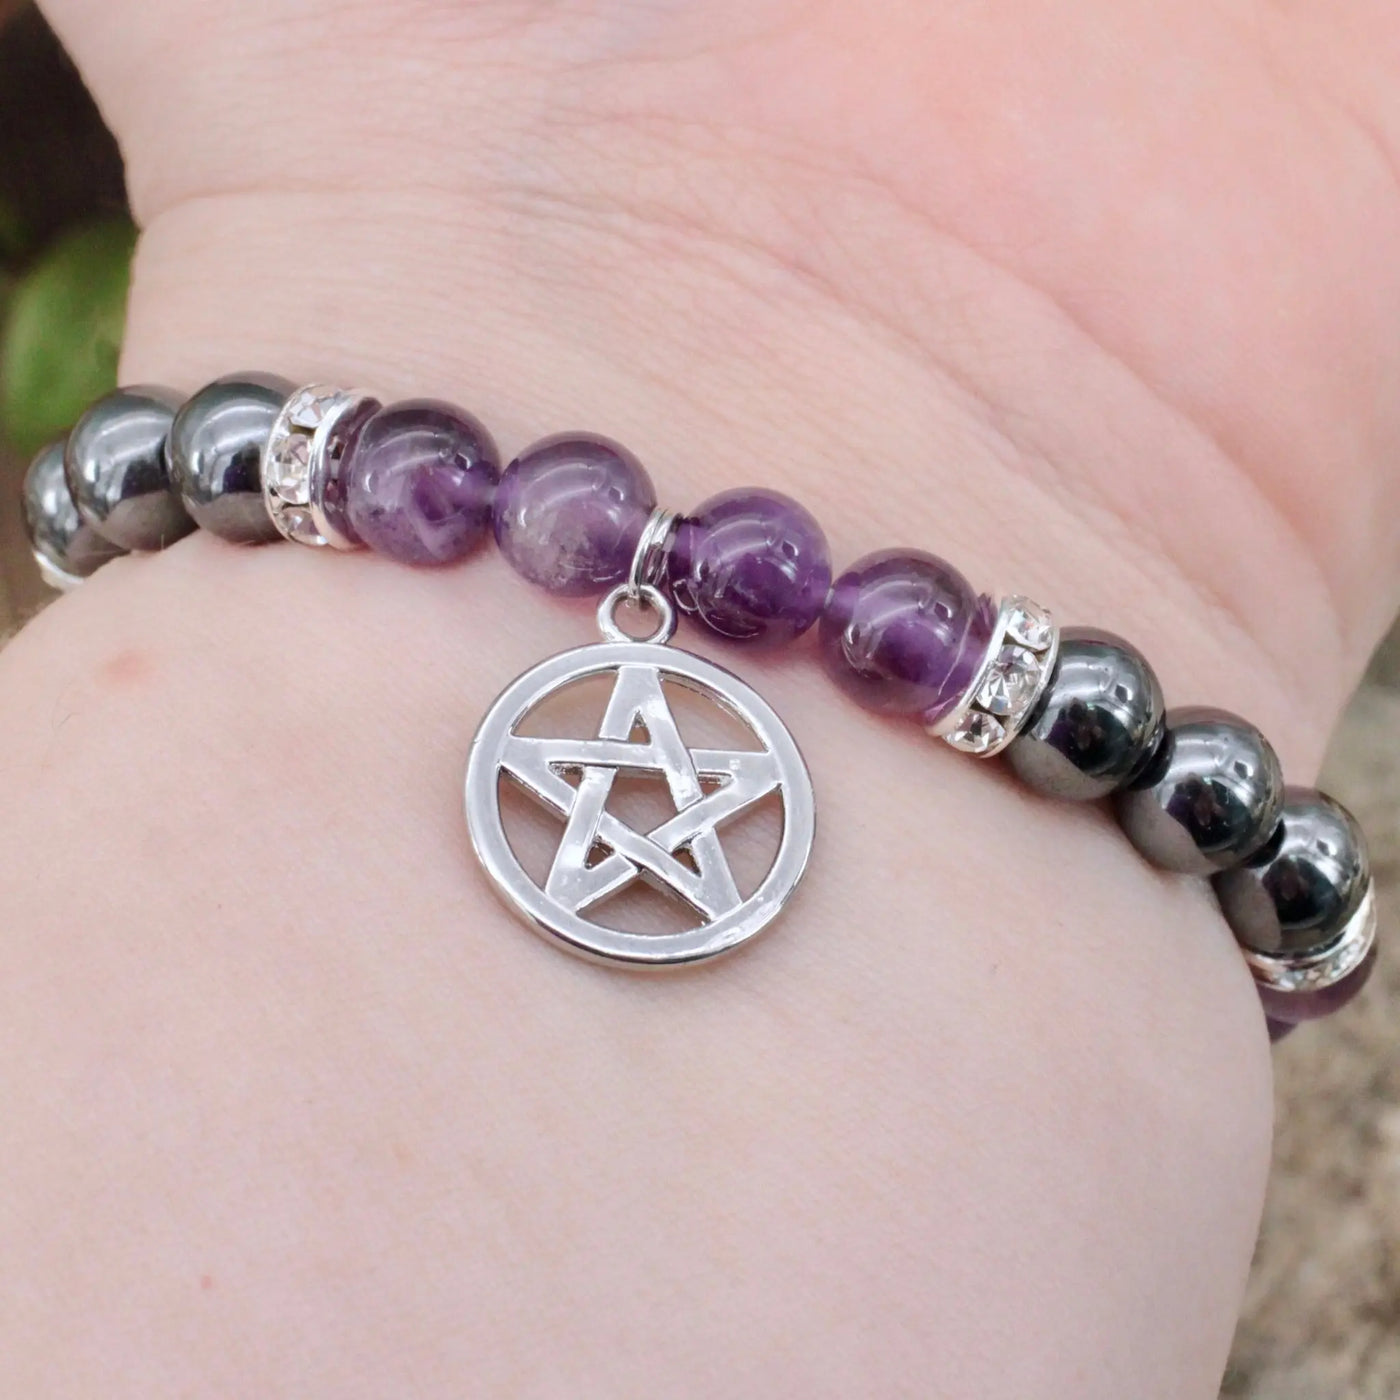 Amethyst and Hematite Bracelet with Pentacle Charm - 8mm